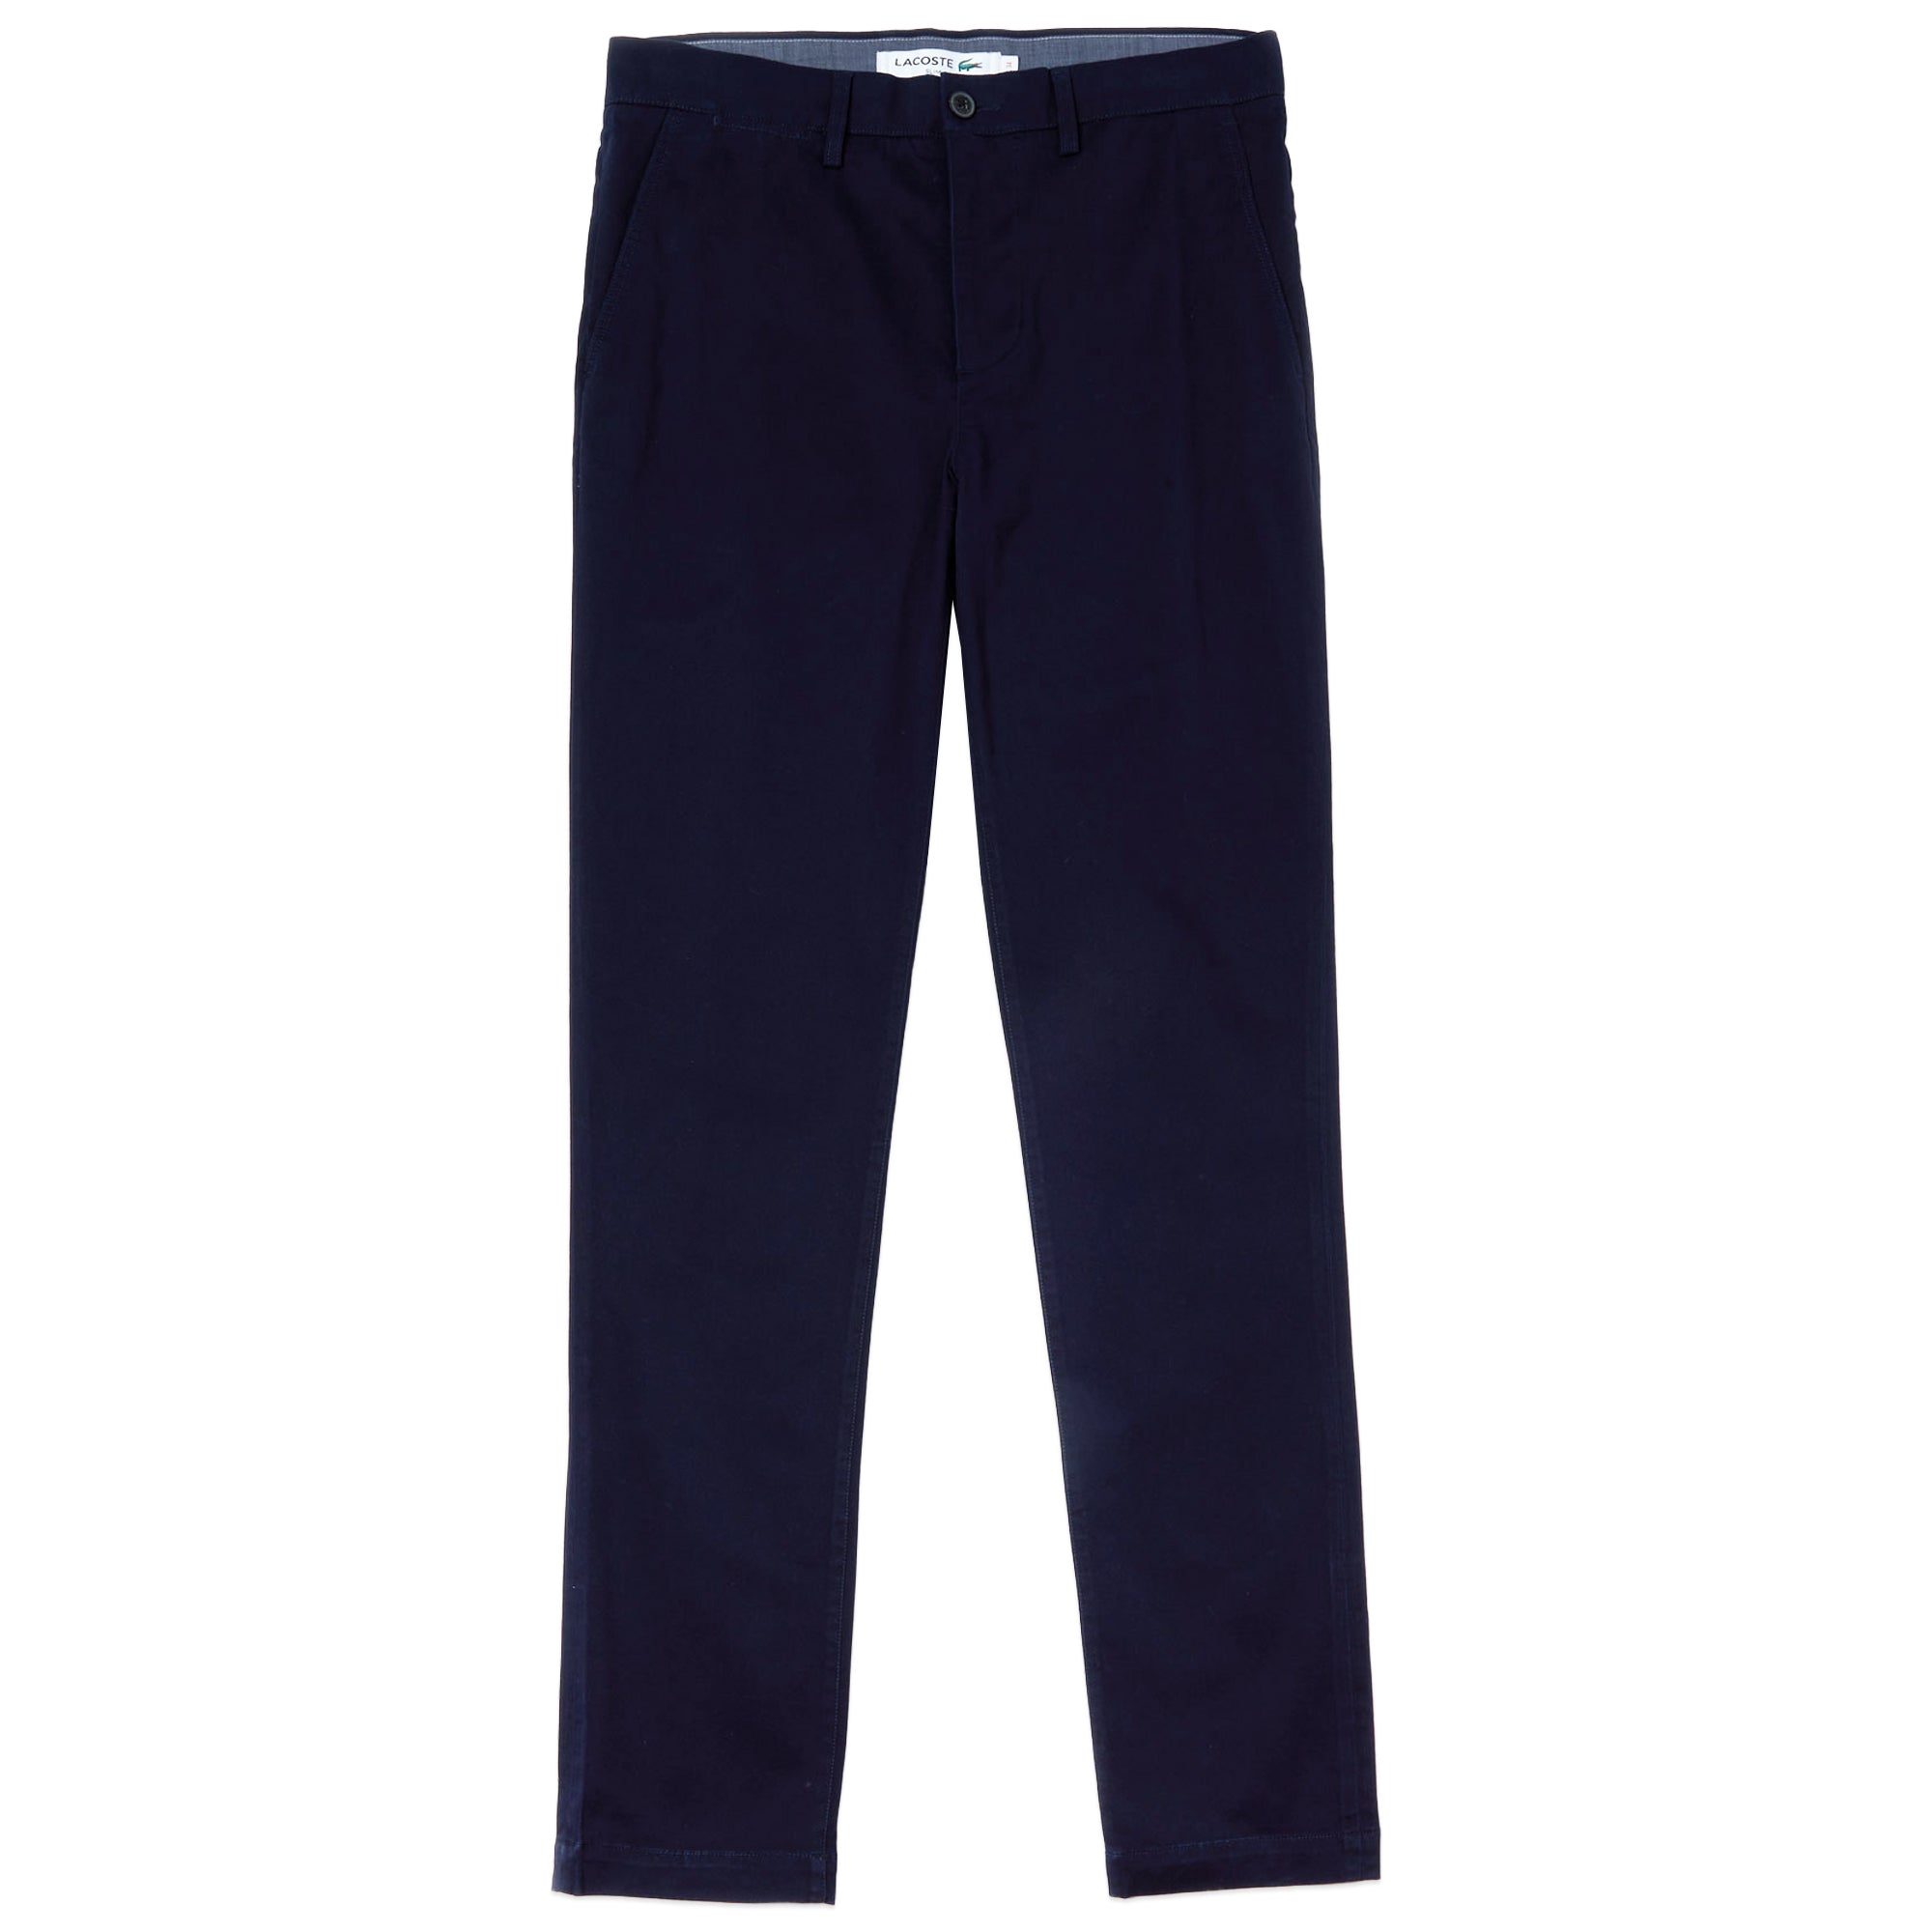 Lacoste Slim Fit Stretch Chino HH9553 - Navy Blue